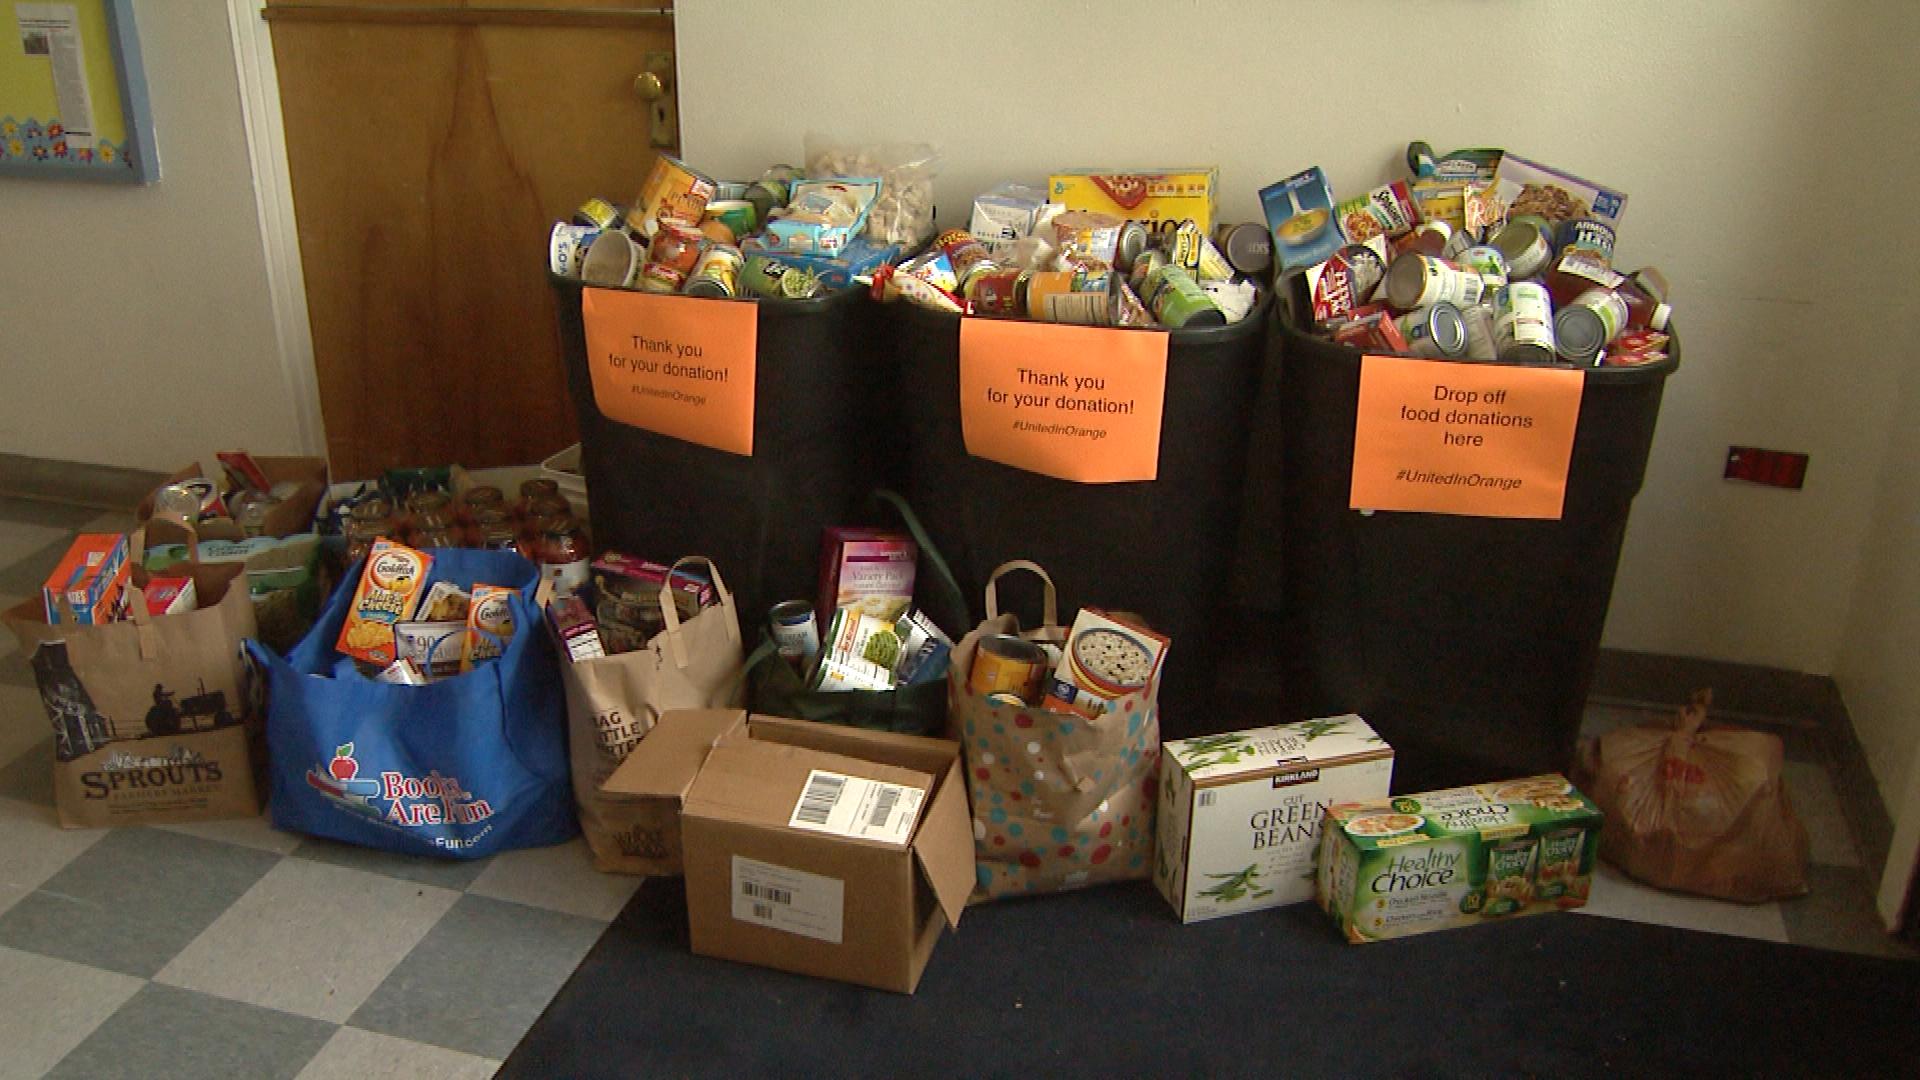 Items collected during the United in Orange Food Drive in 2014 (credit: CBS)